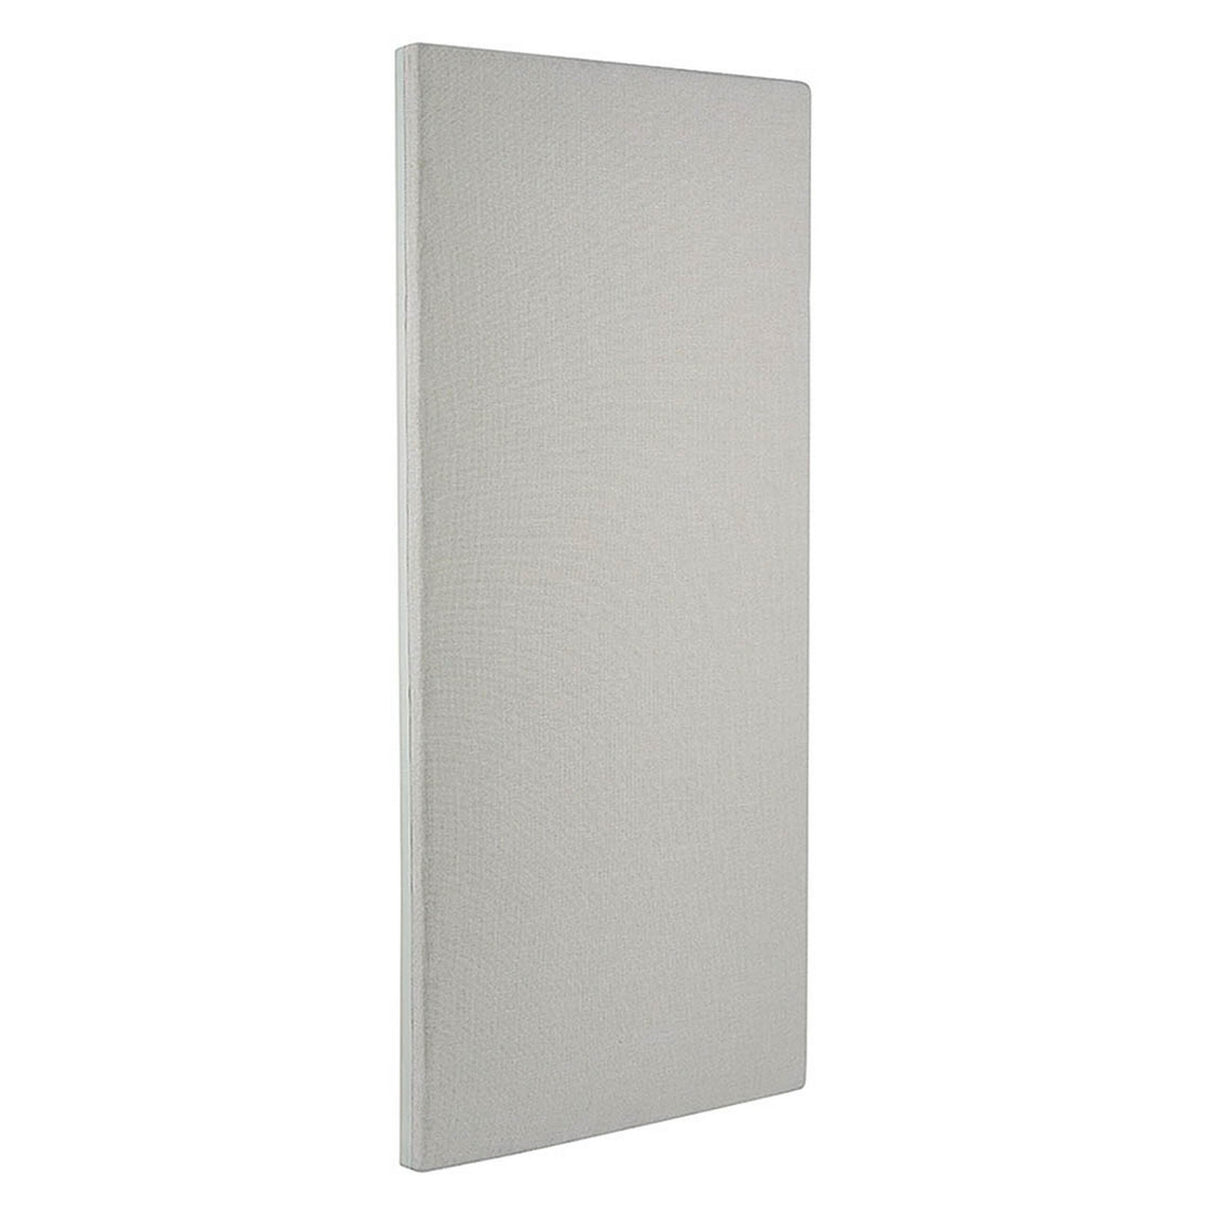 GeerFab MultiZorber OC703DR 24 x 48 Inch Acoustic Panel, Coin